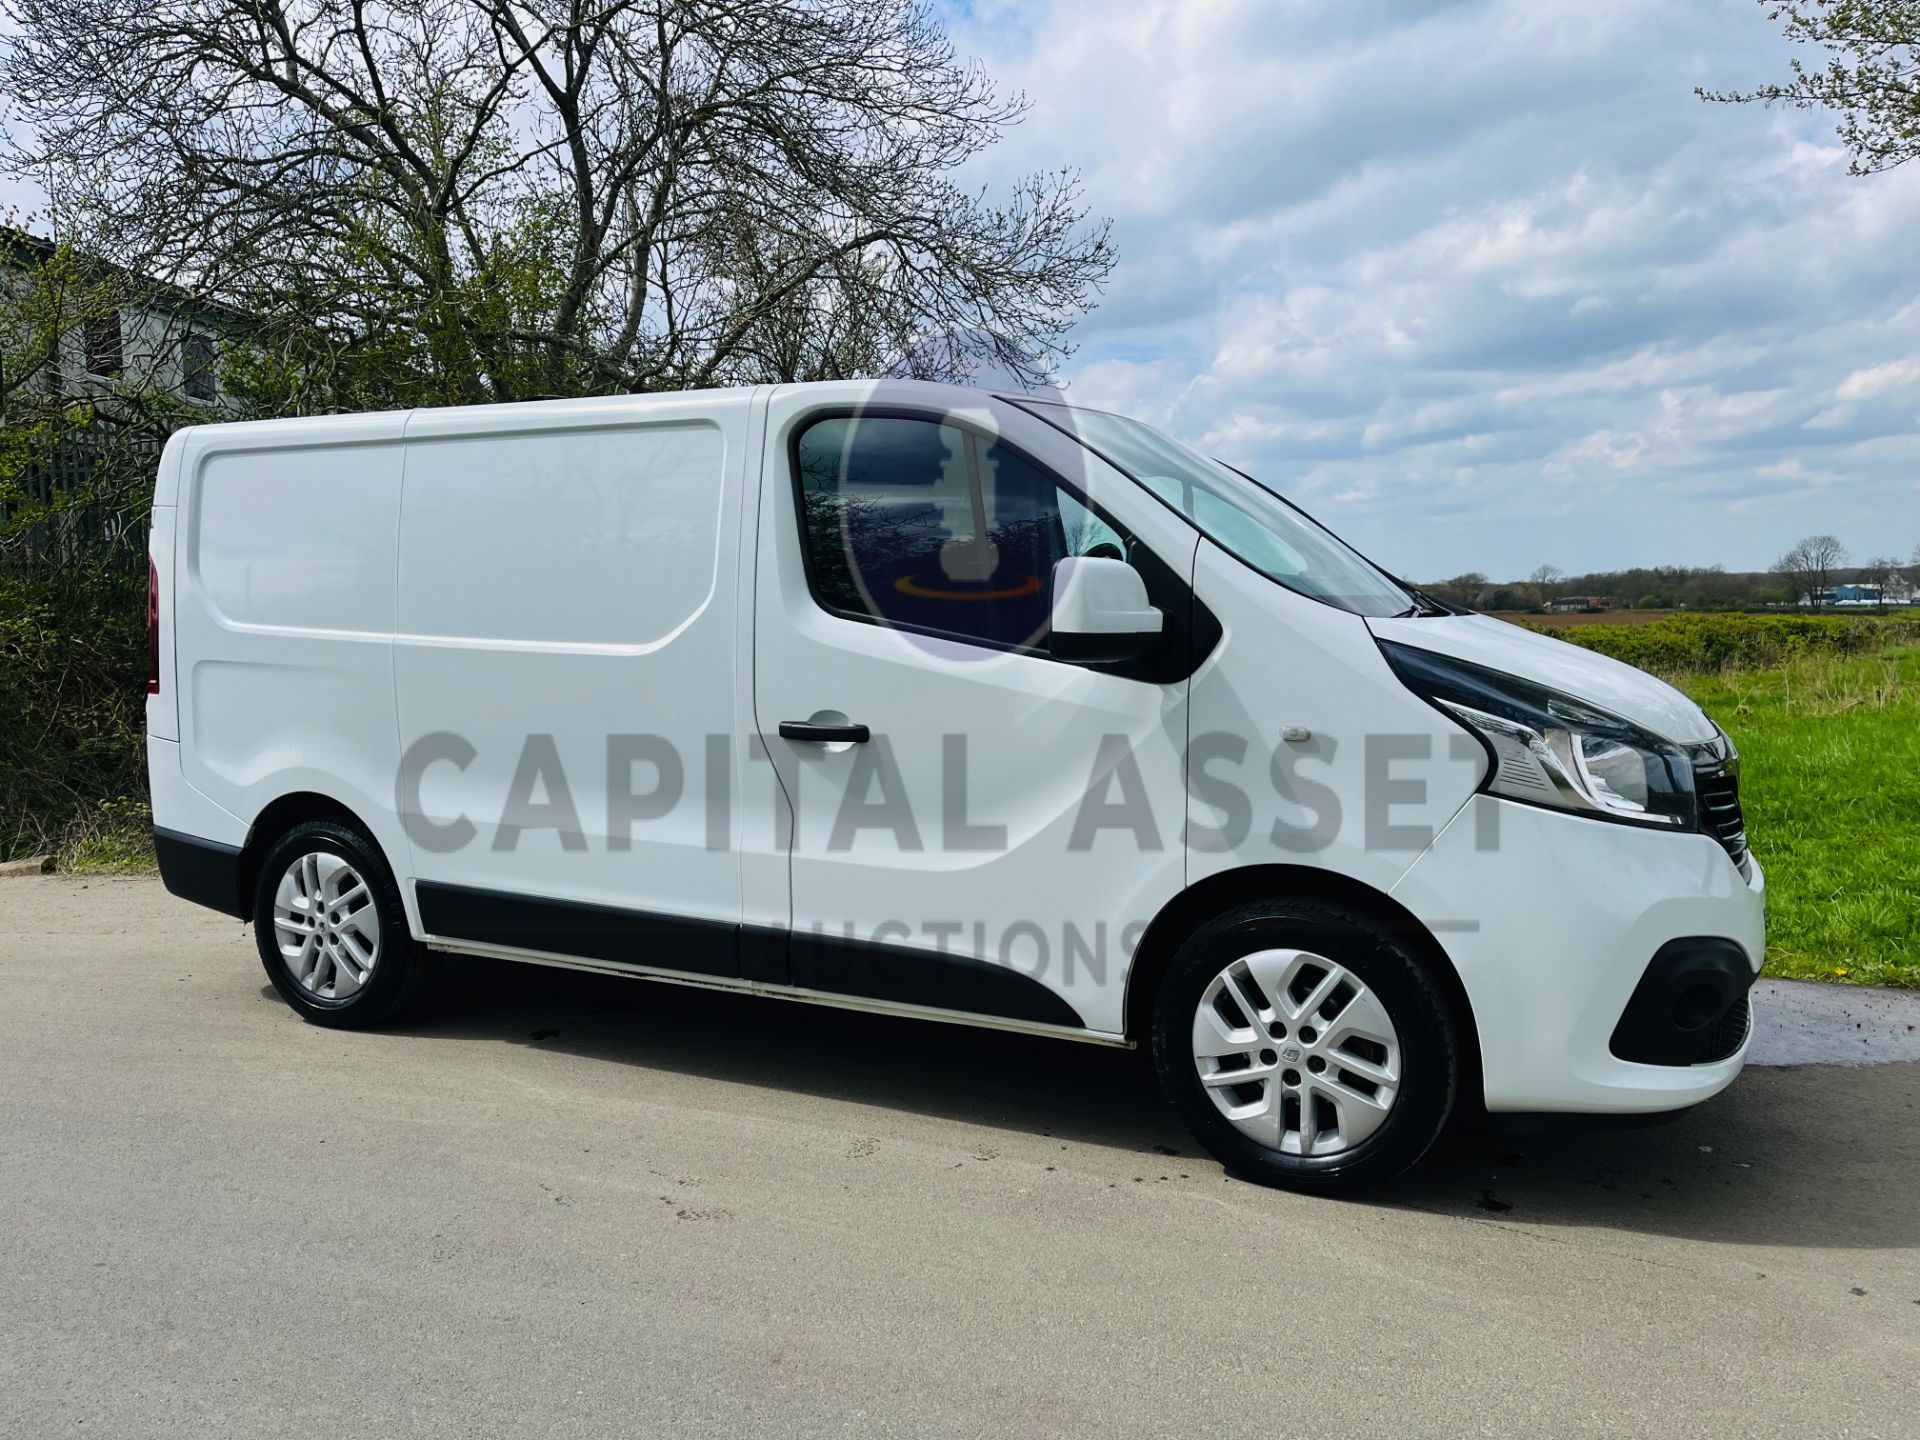 (ON SALE) RENAULT TRAFIC DCI-ENERGY SPORT (2018 MODEL) 1 OWNER WITH HISTORY - SAT NAV - (AC) EURO 6